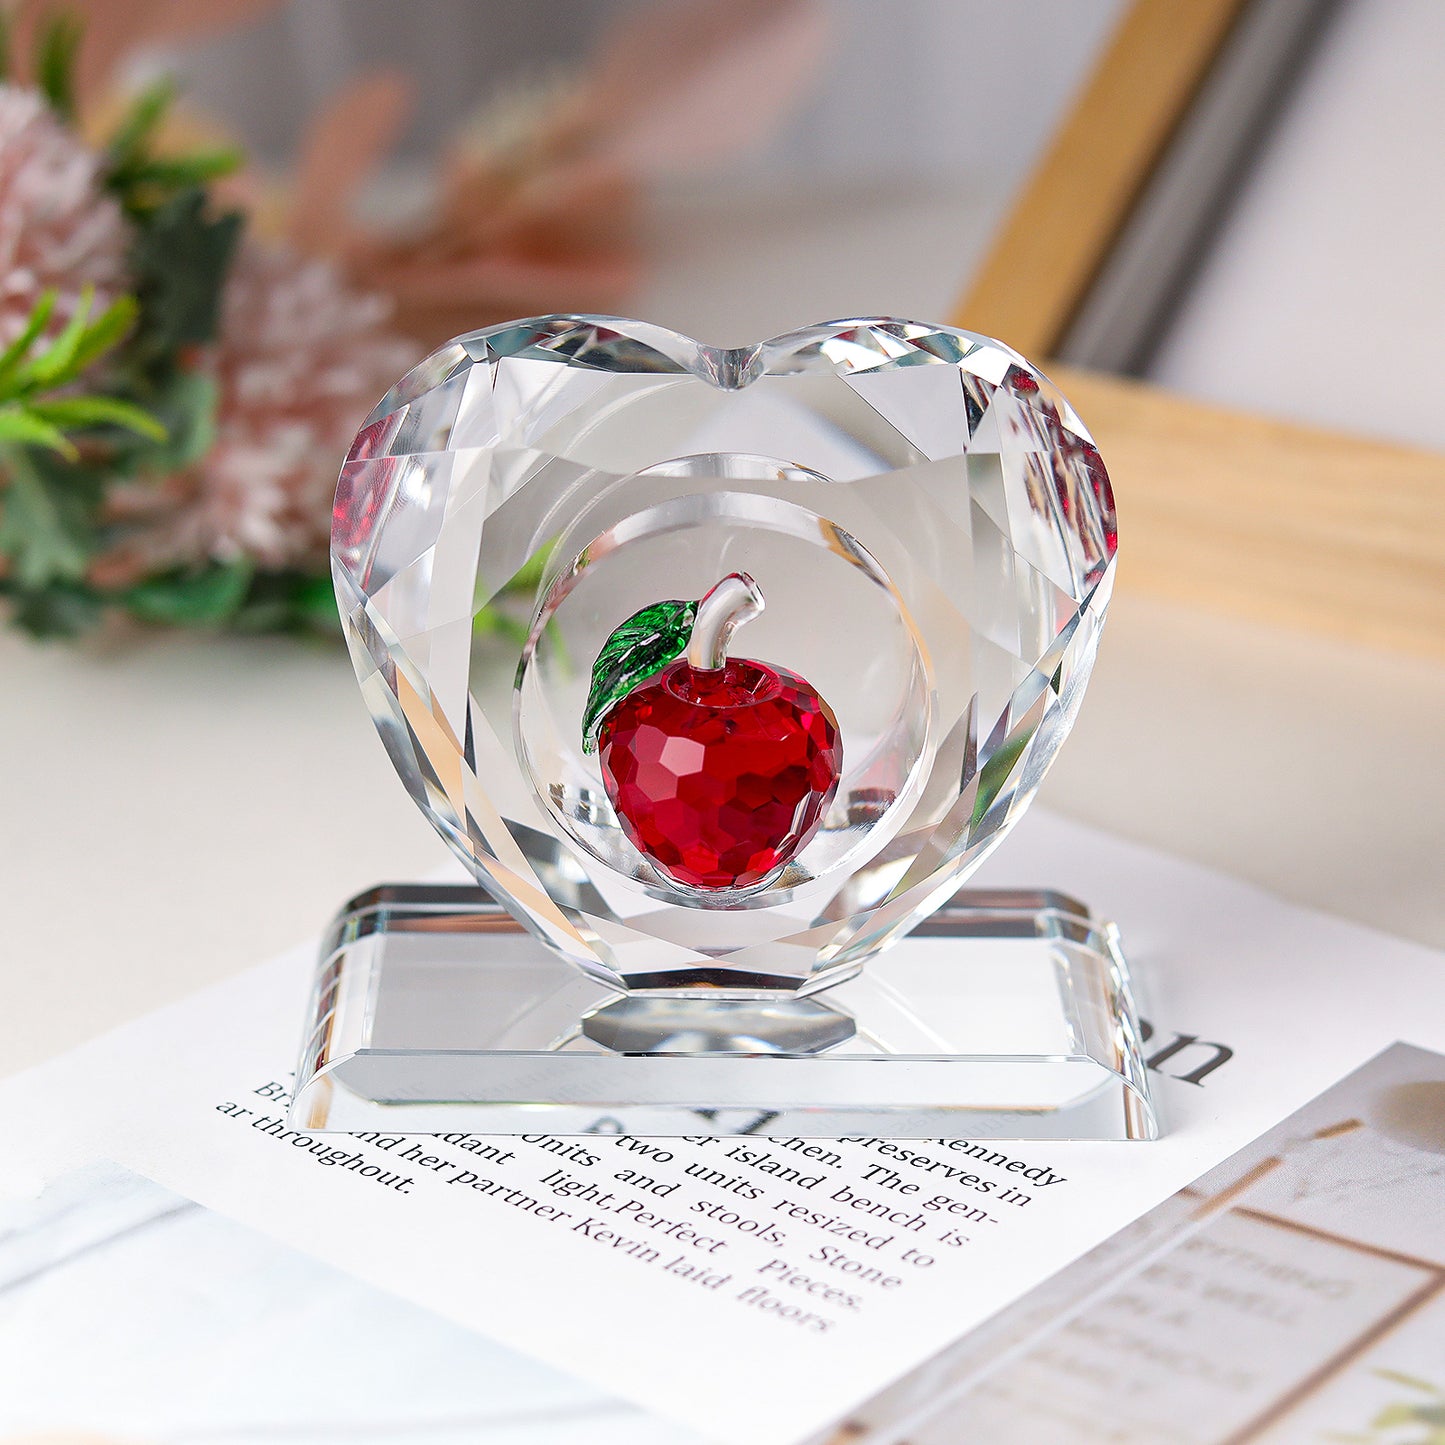 Heart-shaped Crystal Paperweight with Colorful Apple